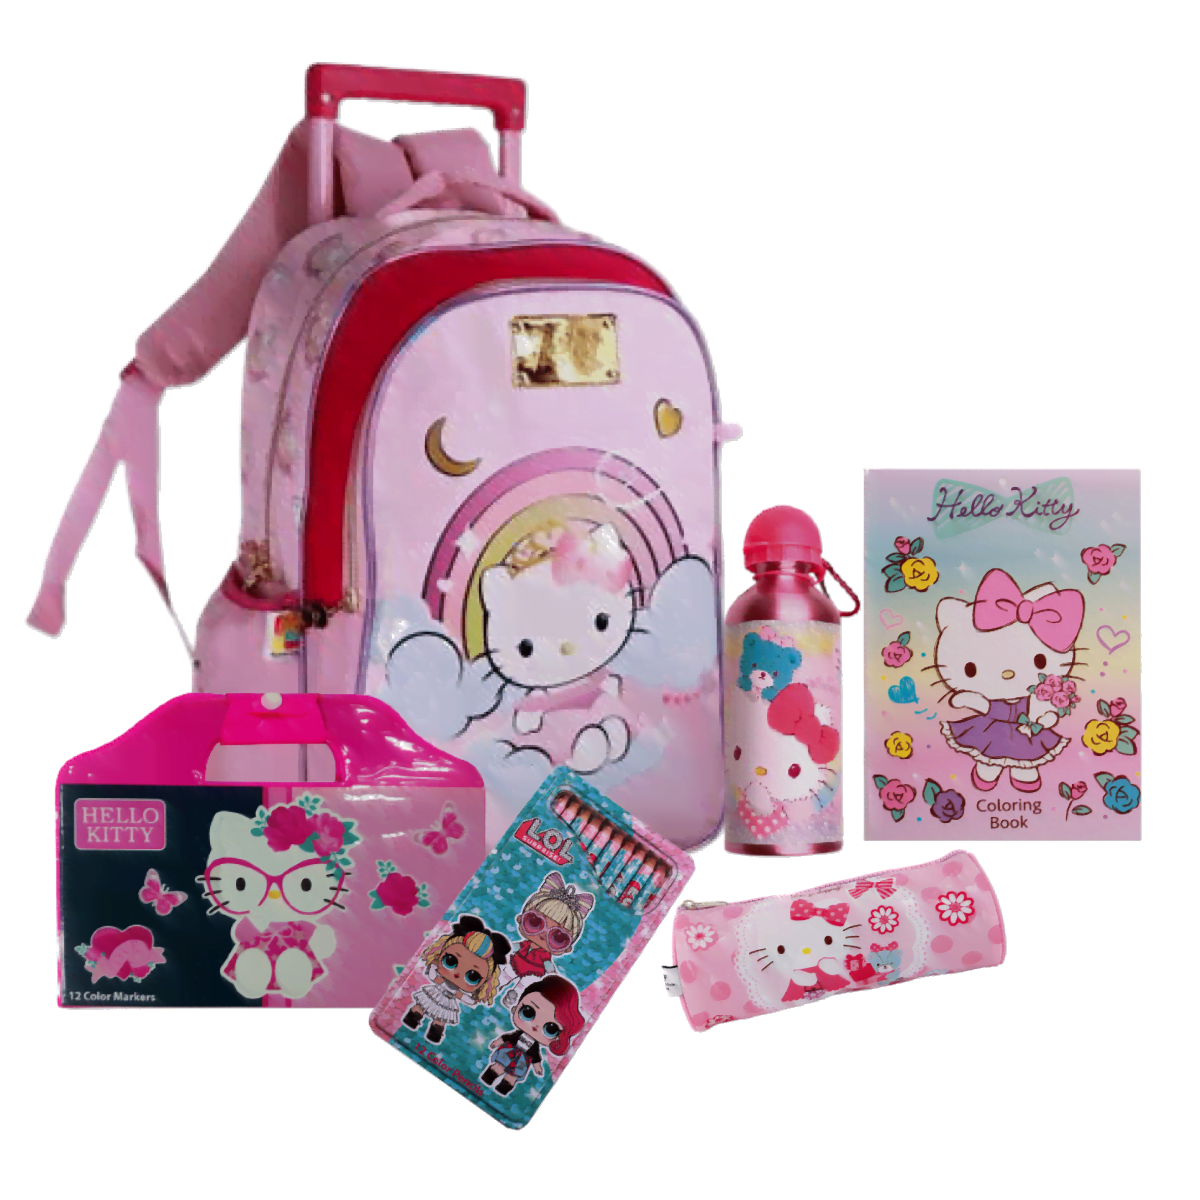 Hello Kitty Min Rainbow Max &Amp;Lt;H1&Amp;Gt;Hello Kitty Girls Combo Gift-Pack (Back To School)&Amp;Lt;/H1&Amp;Gt; The Trolley Bag Is A Reliable Companion For Your Journey. The Trolley Features A Main Zip Compartment To Keep Your Child'S Belonging Or School Items. The Trolley Has A Comfortable Handle On The Top. This Hello Kitty Coloring Book Contains 16 Sheets Of Themed Characters To Color In. It Also Has 8 Pages, 2 Stickers. A Beautiful Coloring Book For Your Little One. Kids Will Have The Perfect Time At School With These School Accessories.  The Hello Kitty Aluminum Water Is Highly Fashionable And Practical! You Heard That Right A Travel Water Bottle That Is Amazingly Trendy And Is Made To Last A Lifetime. This Bottle Will Keep Your Beverage Of Choice Hot Or Cold For Hours. Get Your Kids Ready To Go Back To School With This Premium Pencil Case That Keeps Their Pencils, Markers &Amp;Amp; More Ready For Quick Access. Back To School Hello Kitty Girls Combo Gift-Pack